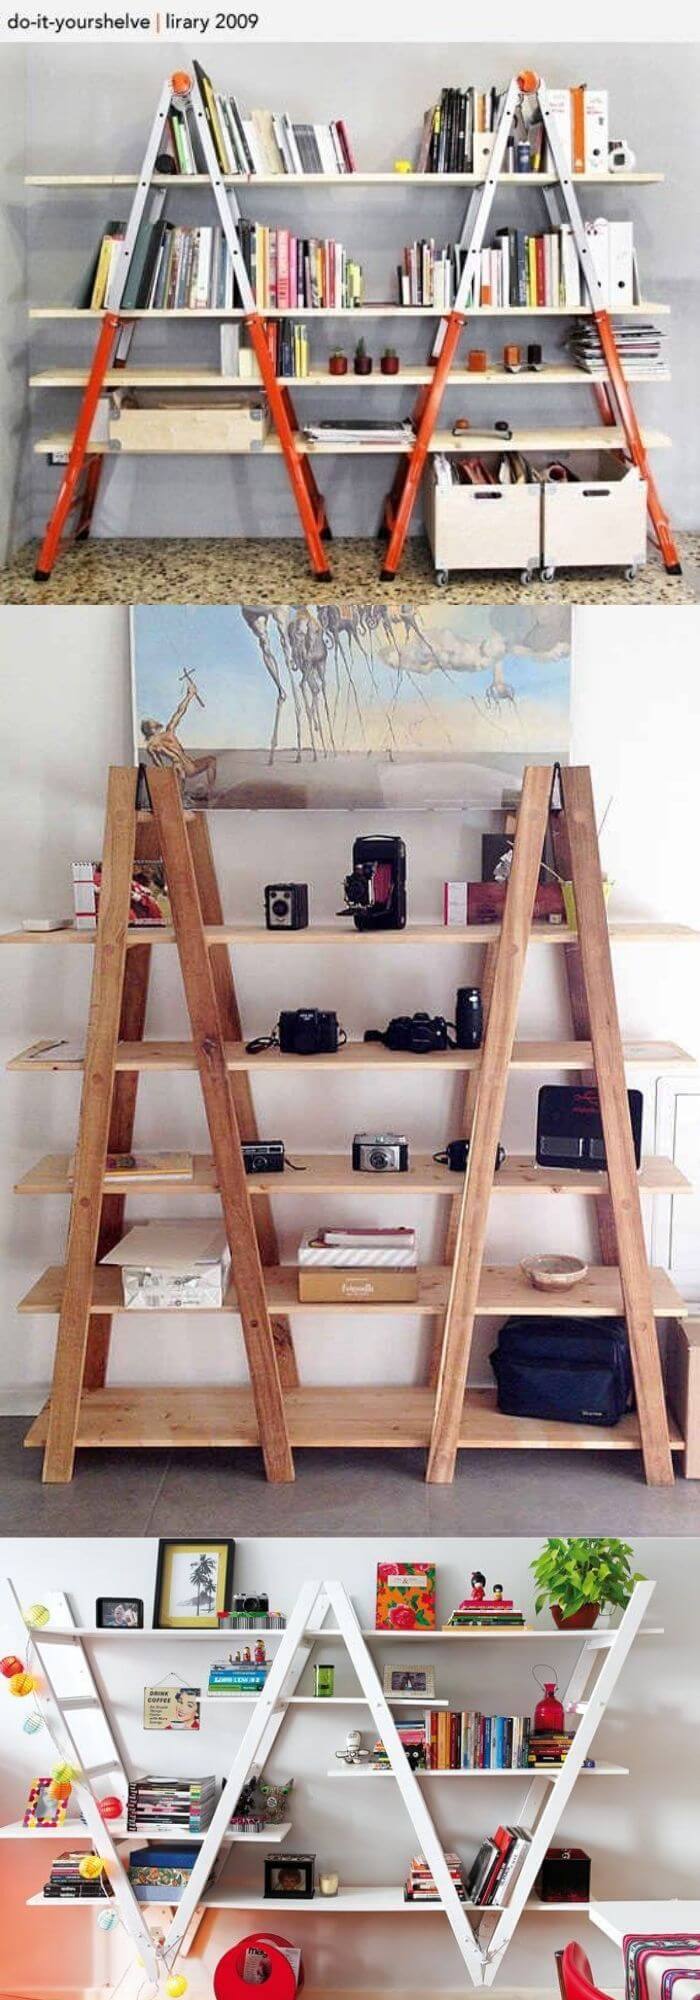 10 clever diy projects